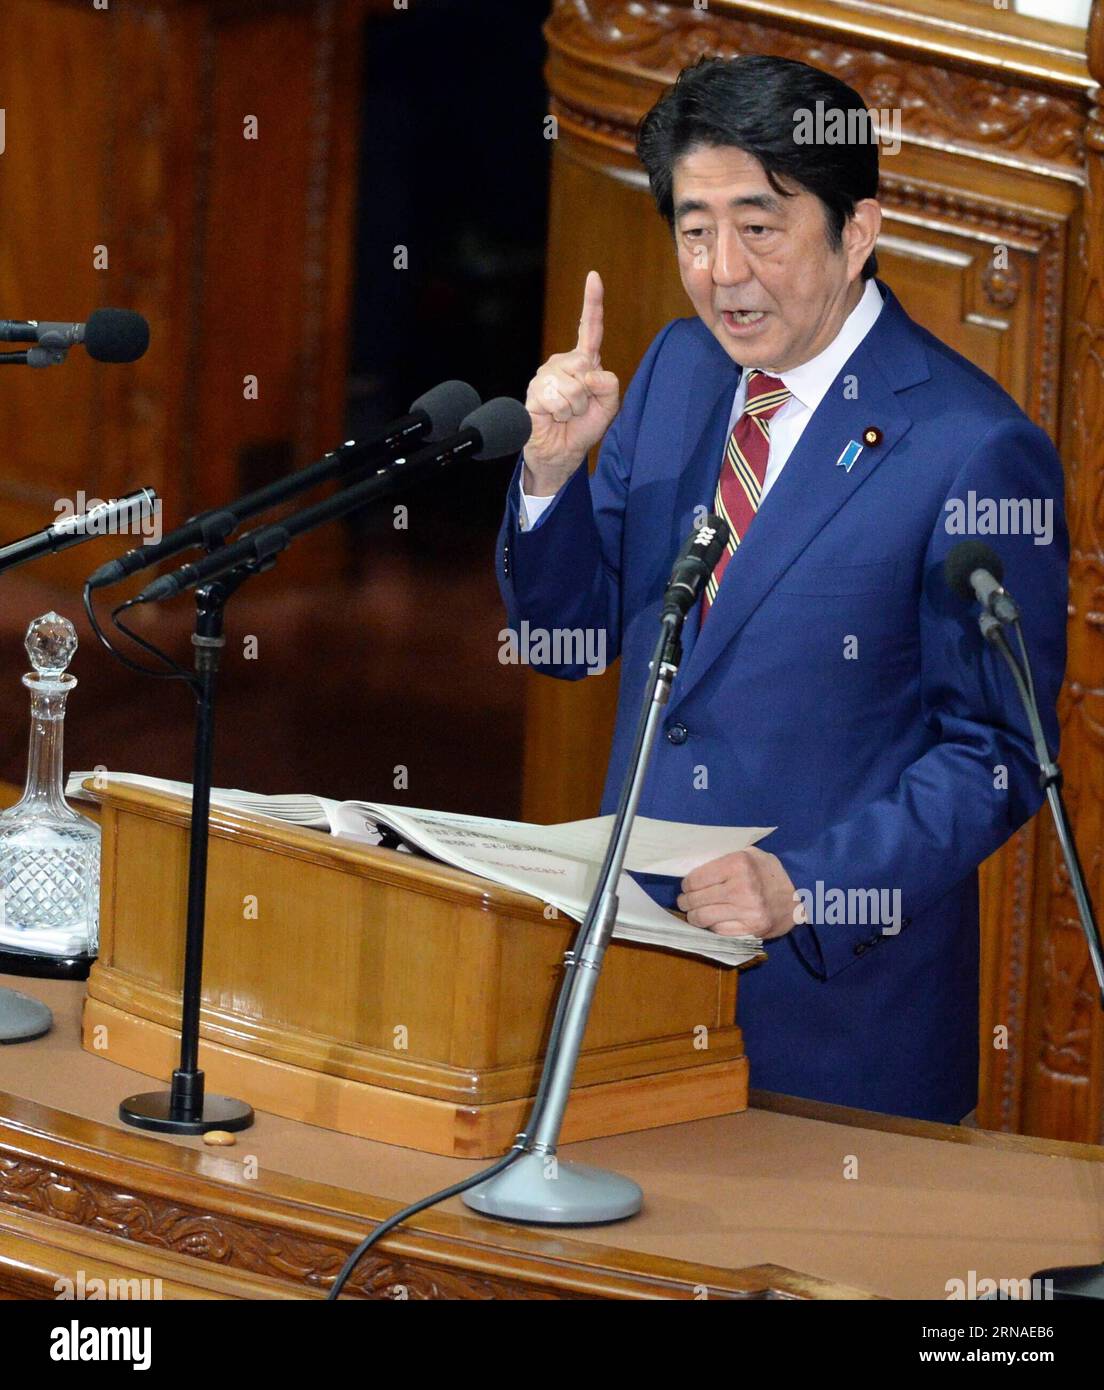 (160122) -- TOKYO, Jan. 22, 2016 -- Japanese Prime Minister Shinzo Abe delivers his policy speech during a session of the House of Representatives in Tokyo, Japan, on Jan. 22, 2016. Japanese Prime Minister Shinzo Abe sought to gain more votes from lower income class for the upcoming upper house election by vowing to address wage gaps in his policy speech on Friday. ) JAPAN-TOKYO-ABE-POLICY SPEECH MaxPing PUBLICATIONxNOTxINxCHN   160122 Tokyo Jan 22 2016 Japanese Prime Ministers Shinzo ABE delivers His Policy Speech during a Session of The House of Representatives in Tokyo Japan ON Jan 22 2016 Stock Photo